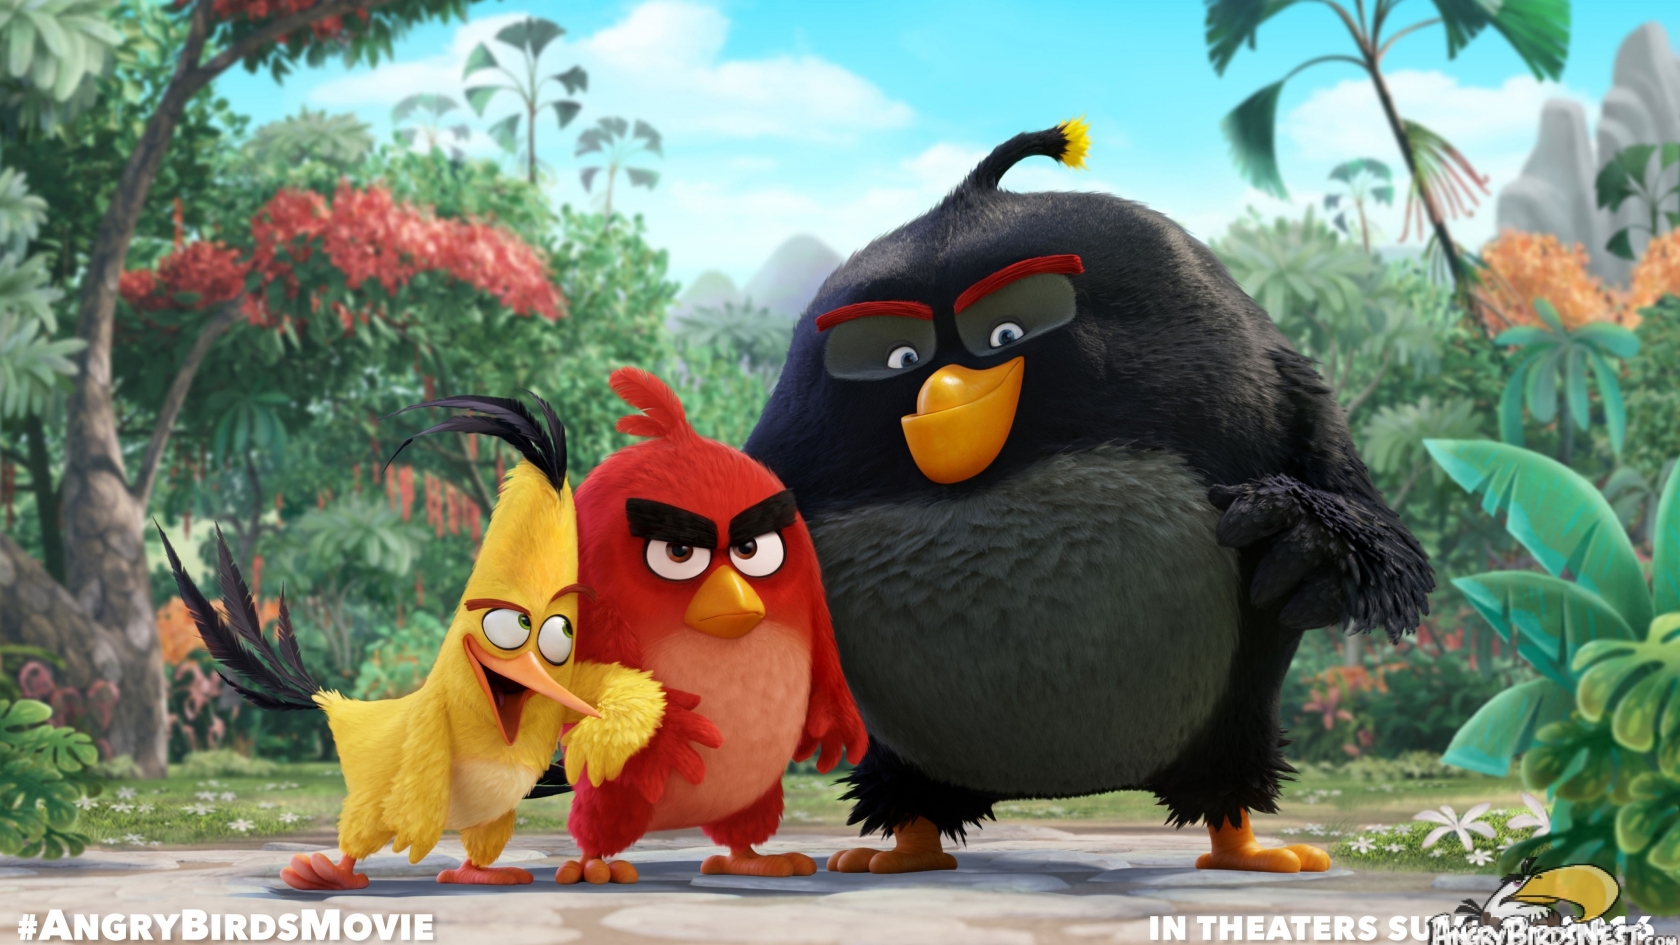 Angry Birds Movie for 1680 x 945 HDTV resolution